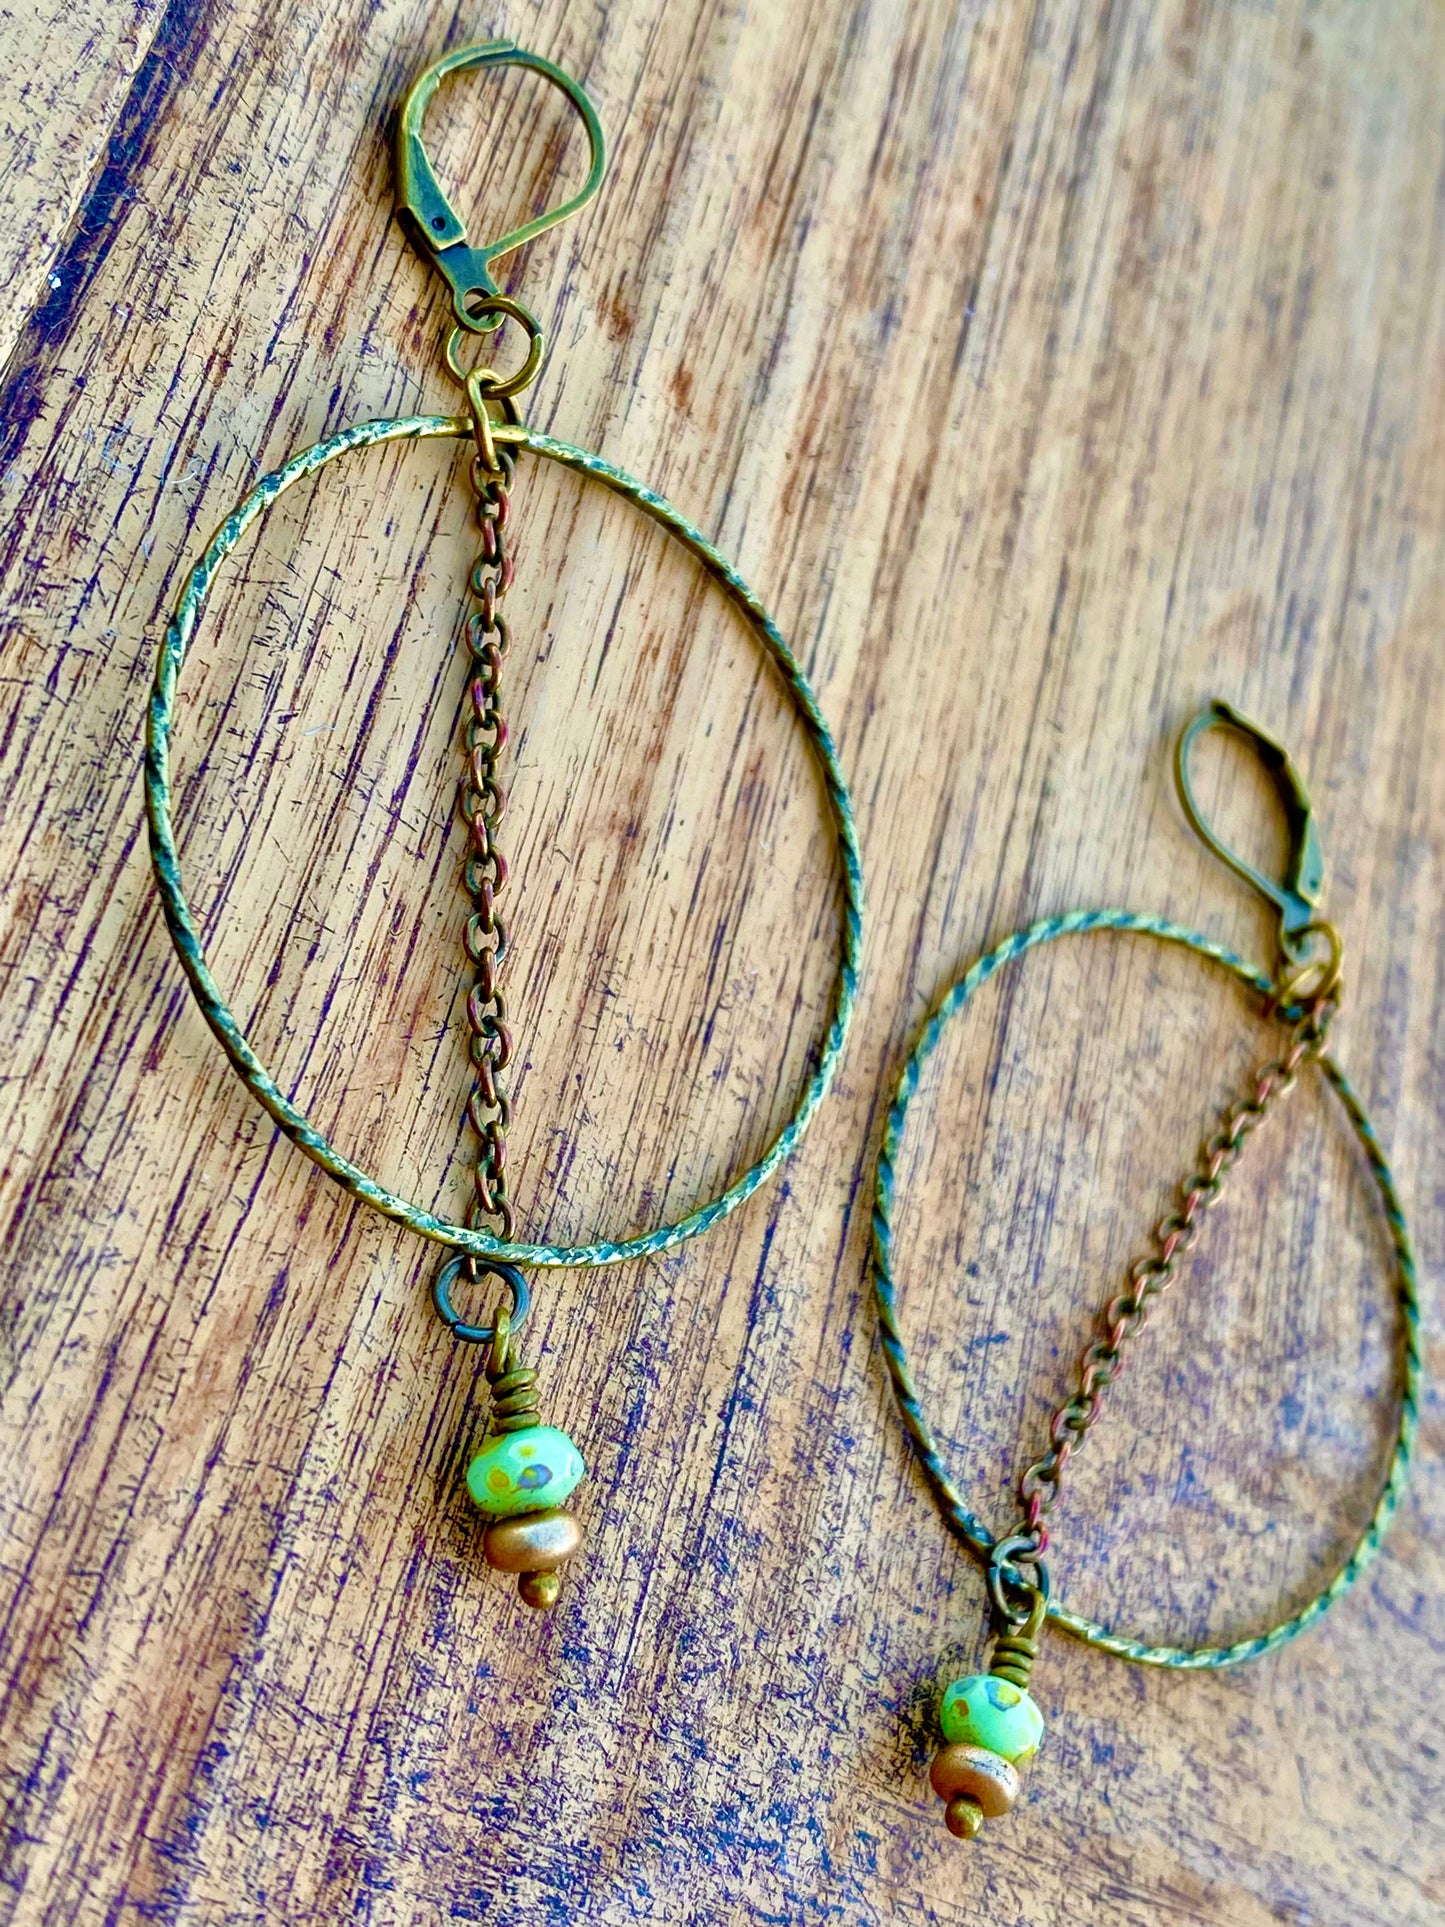 Earrings: Brass Dangles with glass bead accent